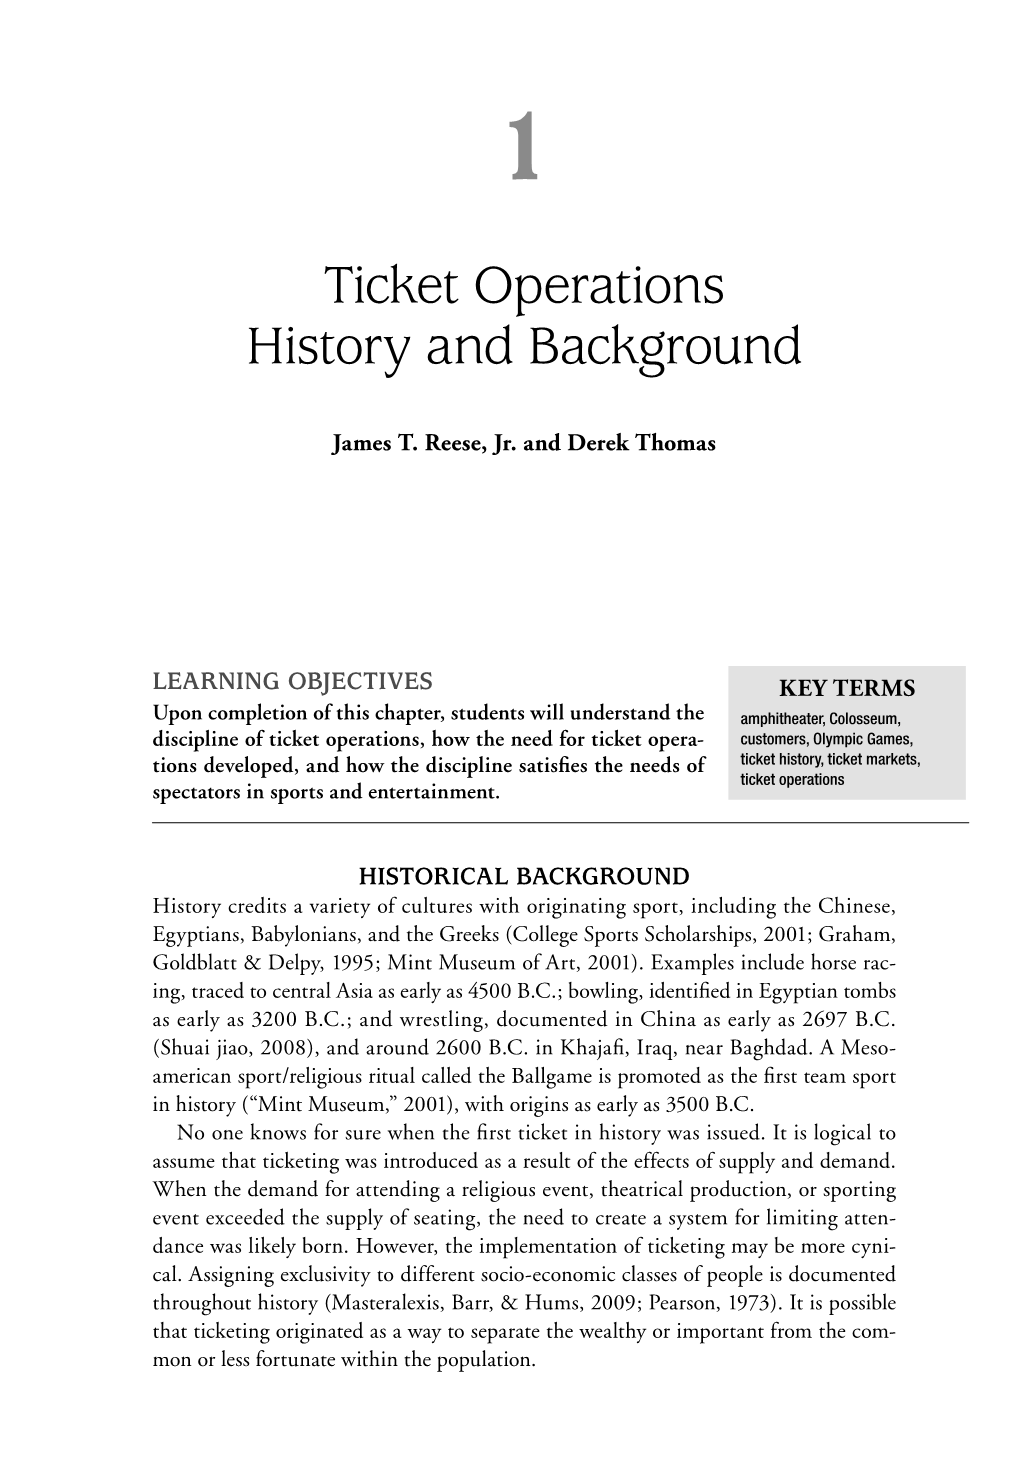 Ticket Operations History and Background